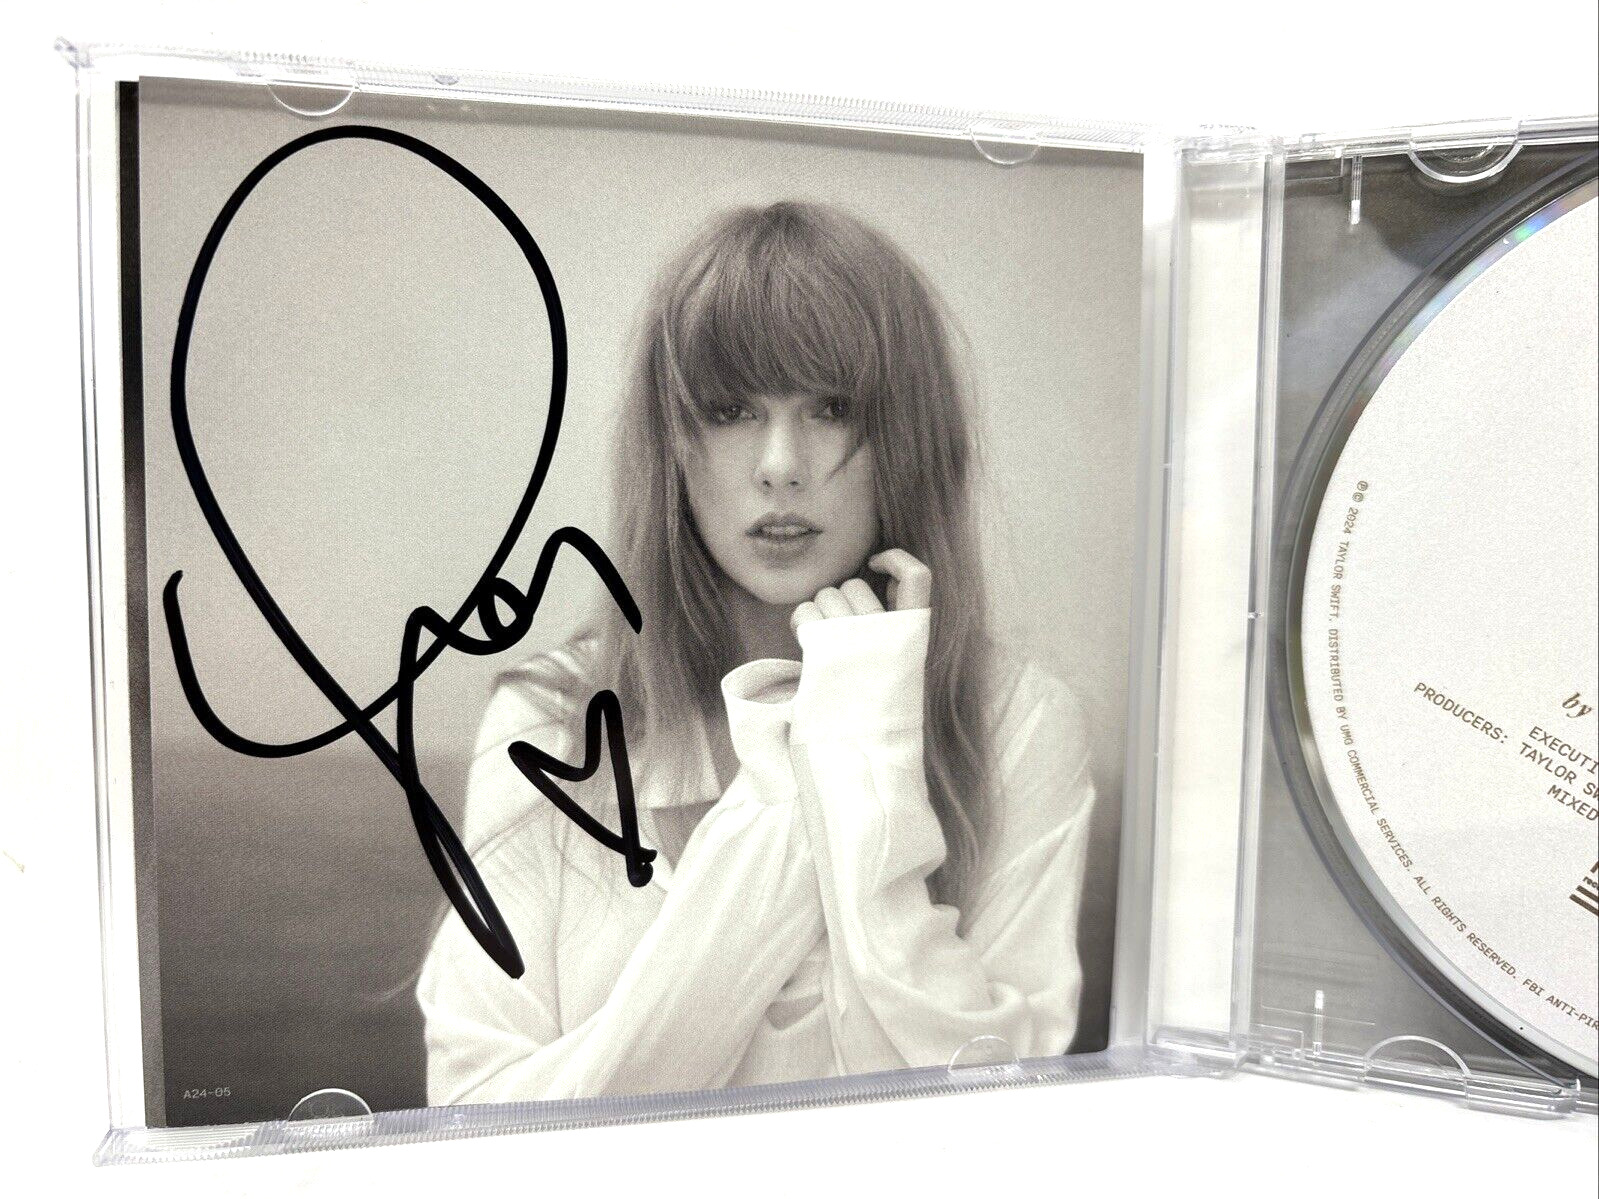 IN HAND Taylor Swift The Tortured Poets Department CD HEART HAND SIGNED PHOTO